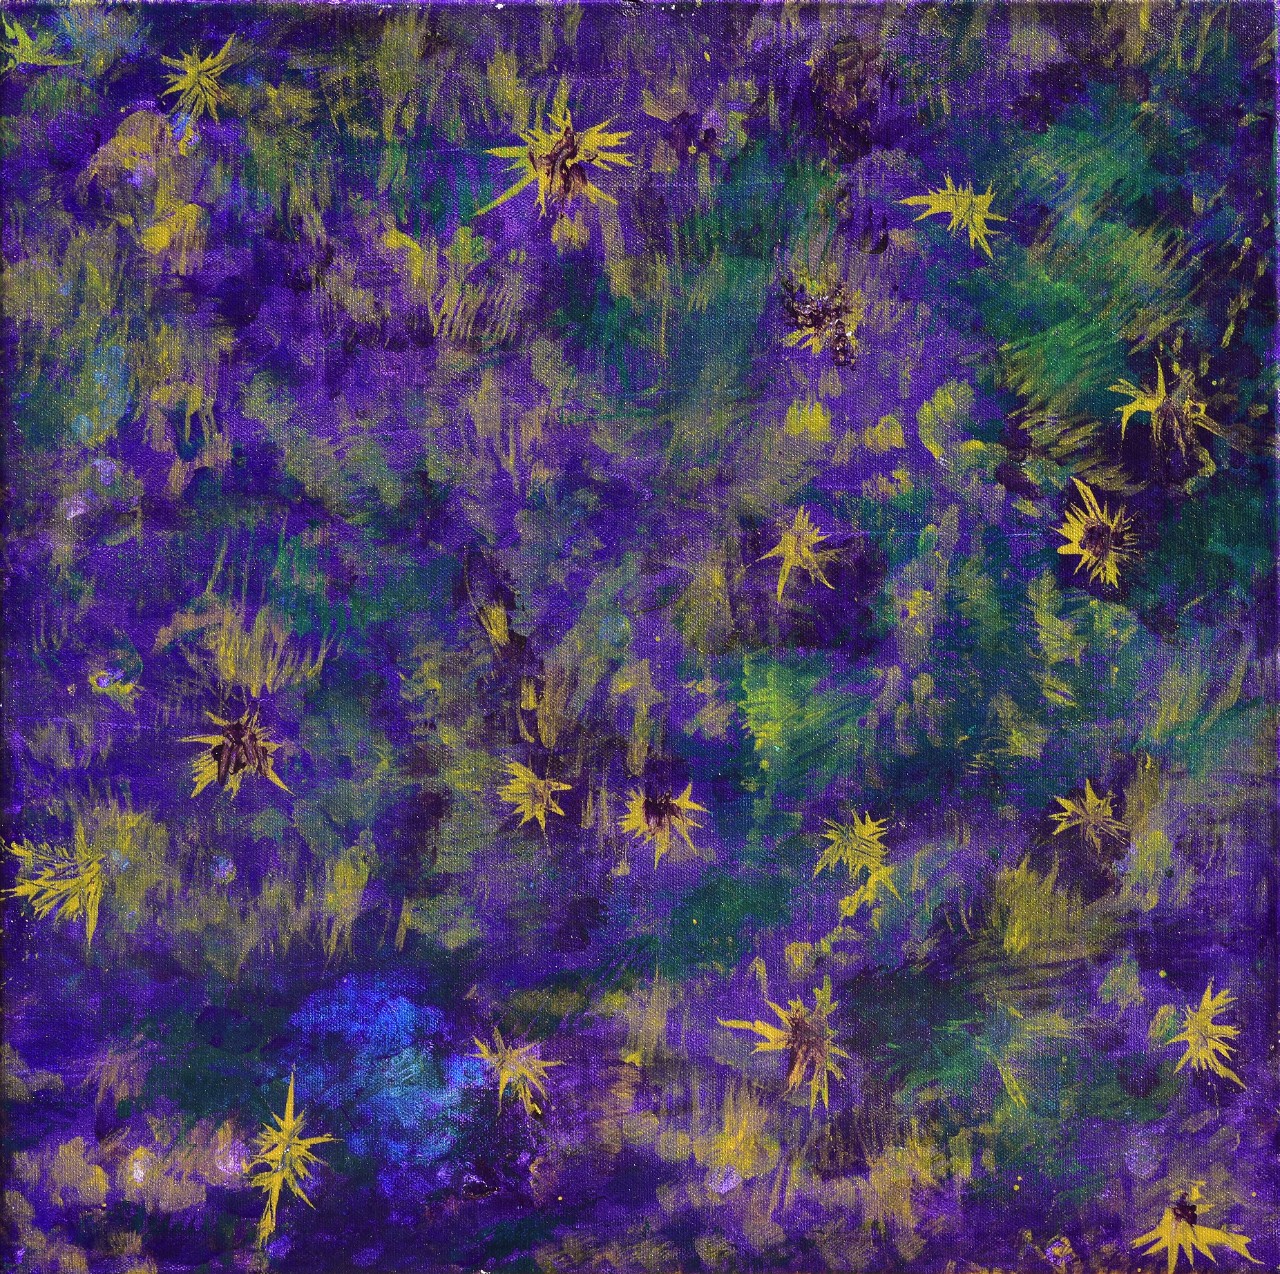 A square canvas covered with purples, blues and greens overlapping one another. There are yellow flowers with brown centers speckled throughout the purple and blue and green background, so it looks like a blurry abstract painting of golden flowers in a garden.